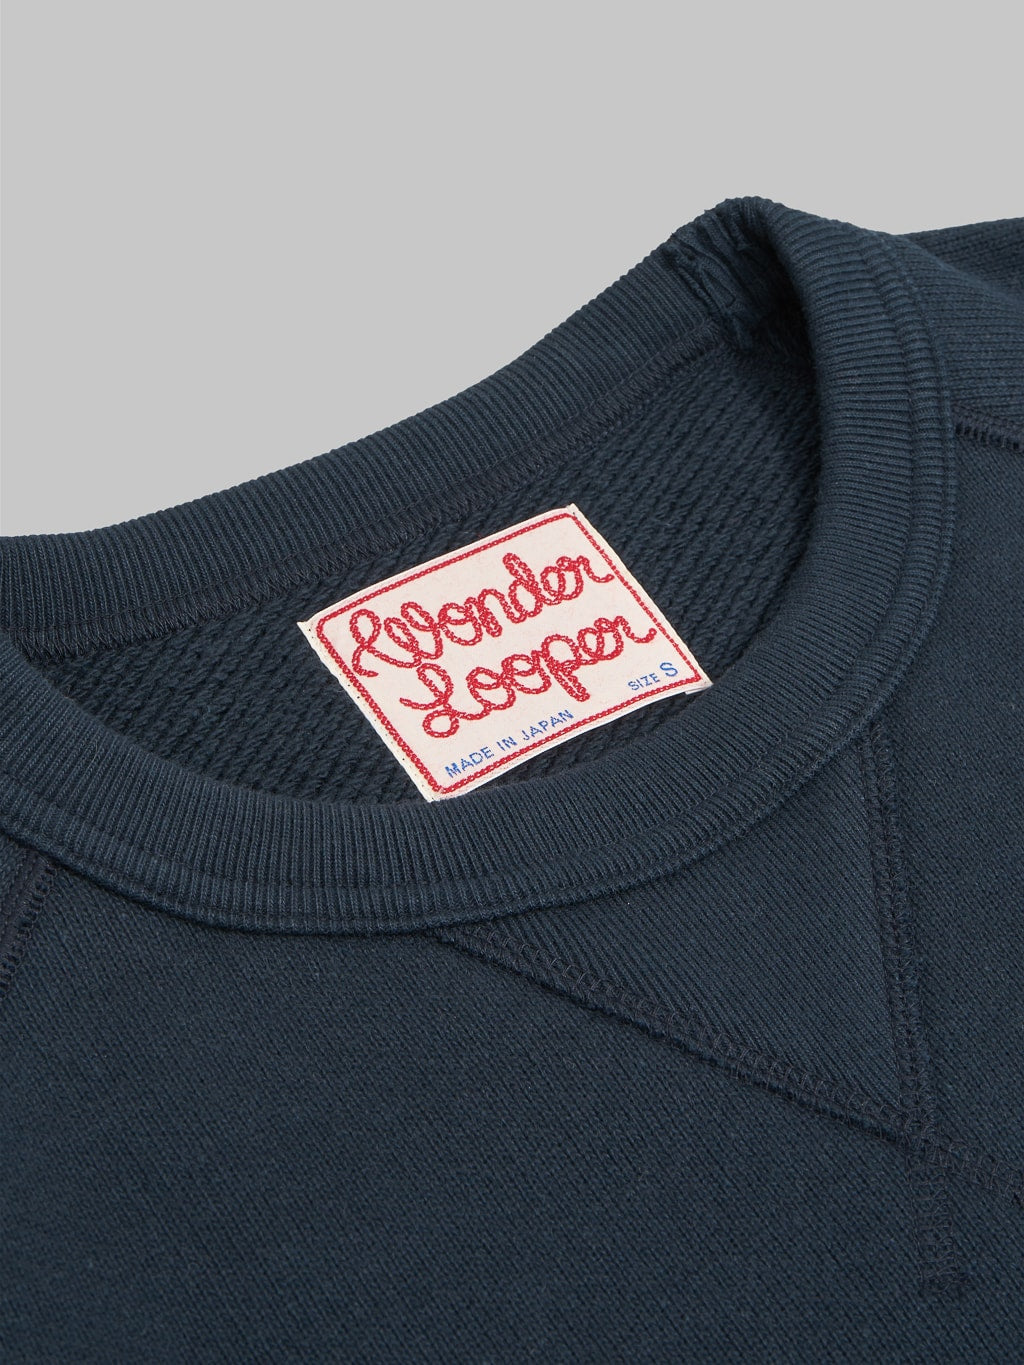 Wonder Looper Pullover Crewneck Double Heavyweight French Terry navy interior label